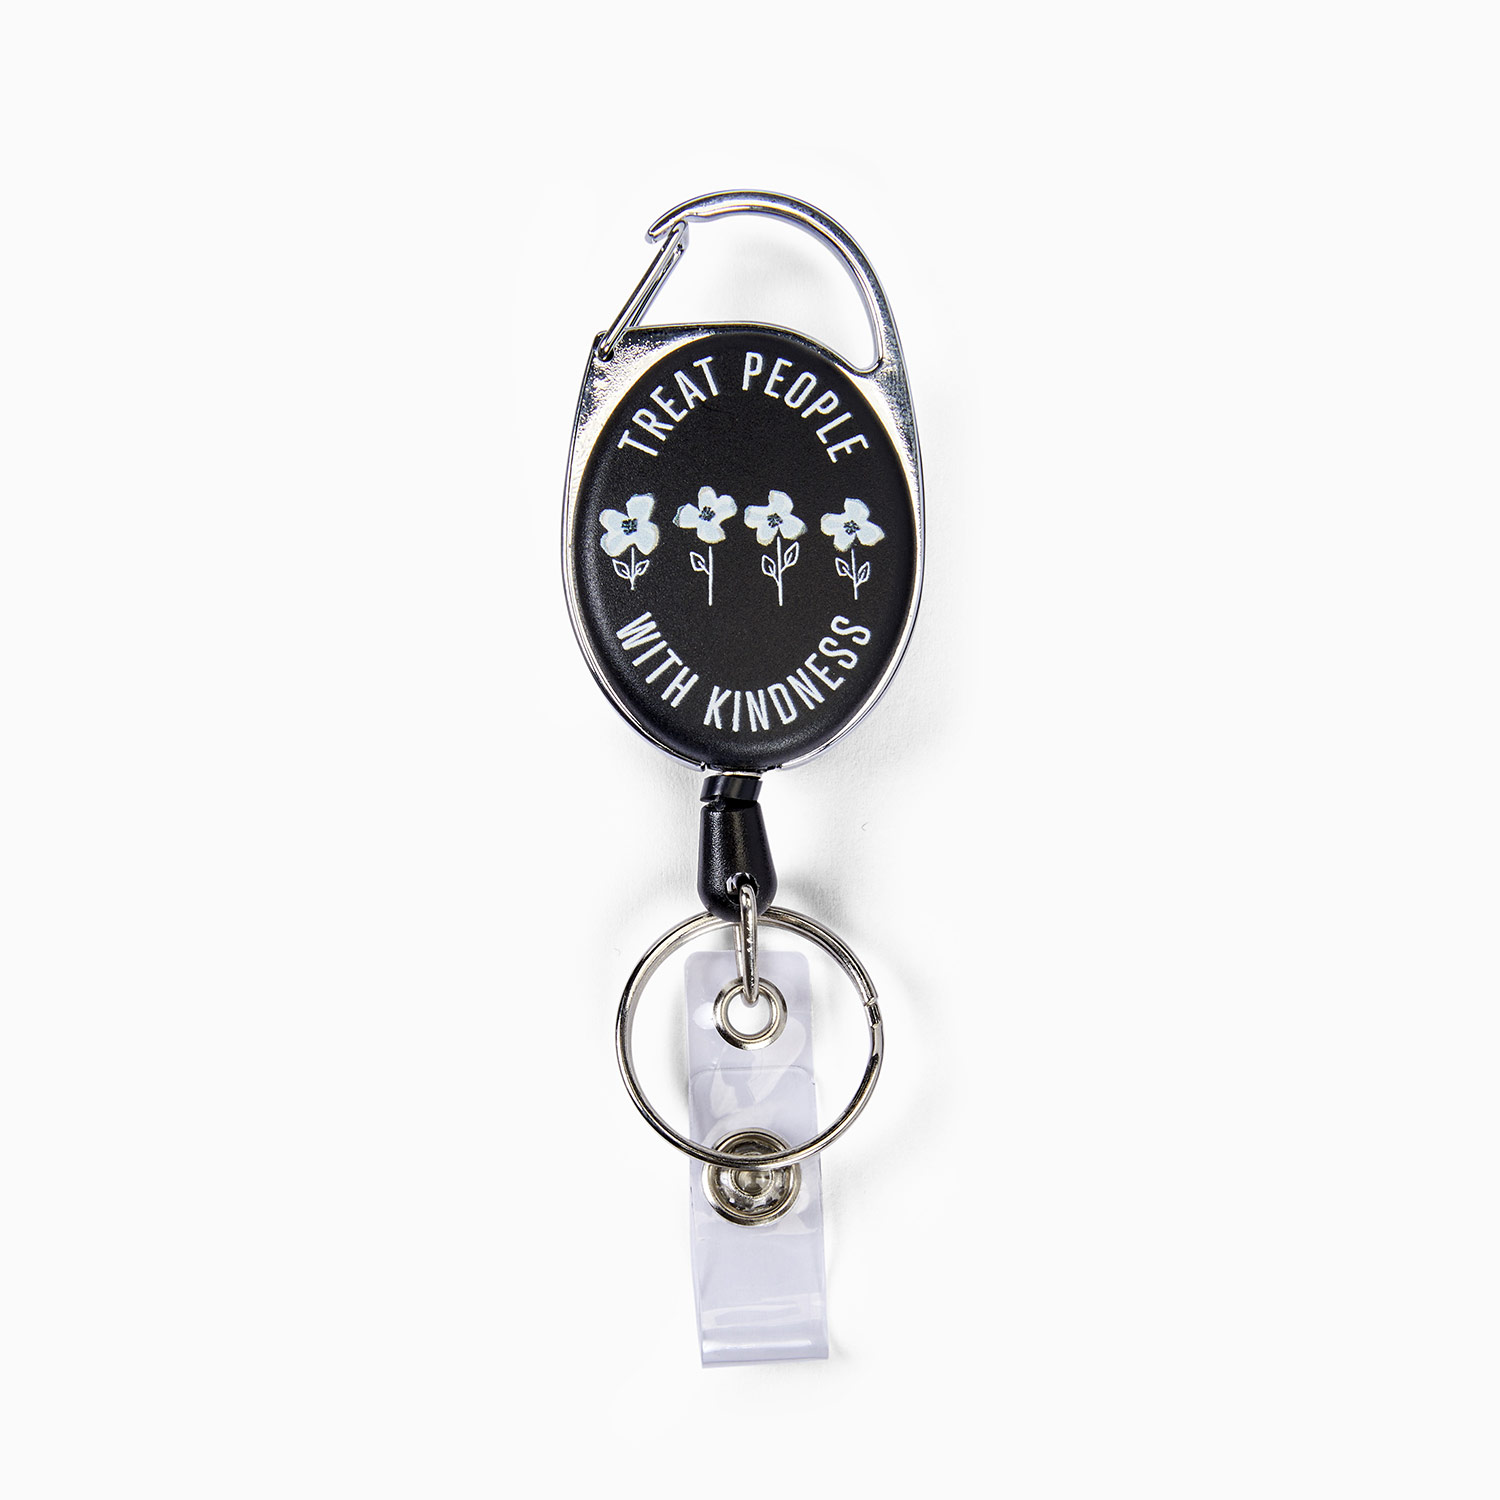 Custom Badge Reels Personalized with White Rustic Pattern and The Sayings Love and Kay & Jim